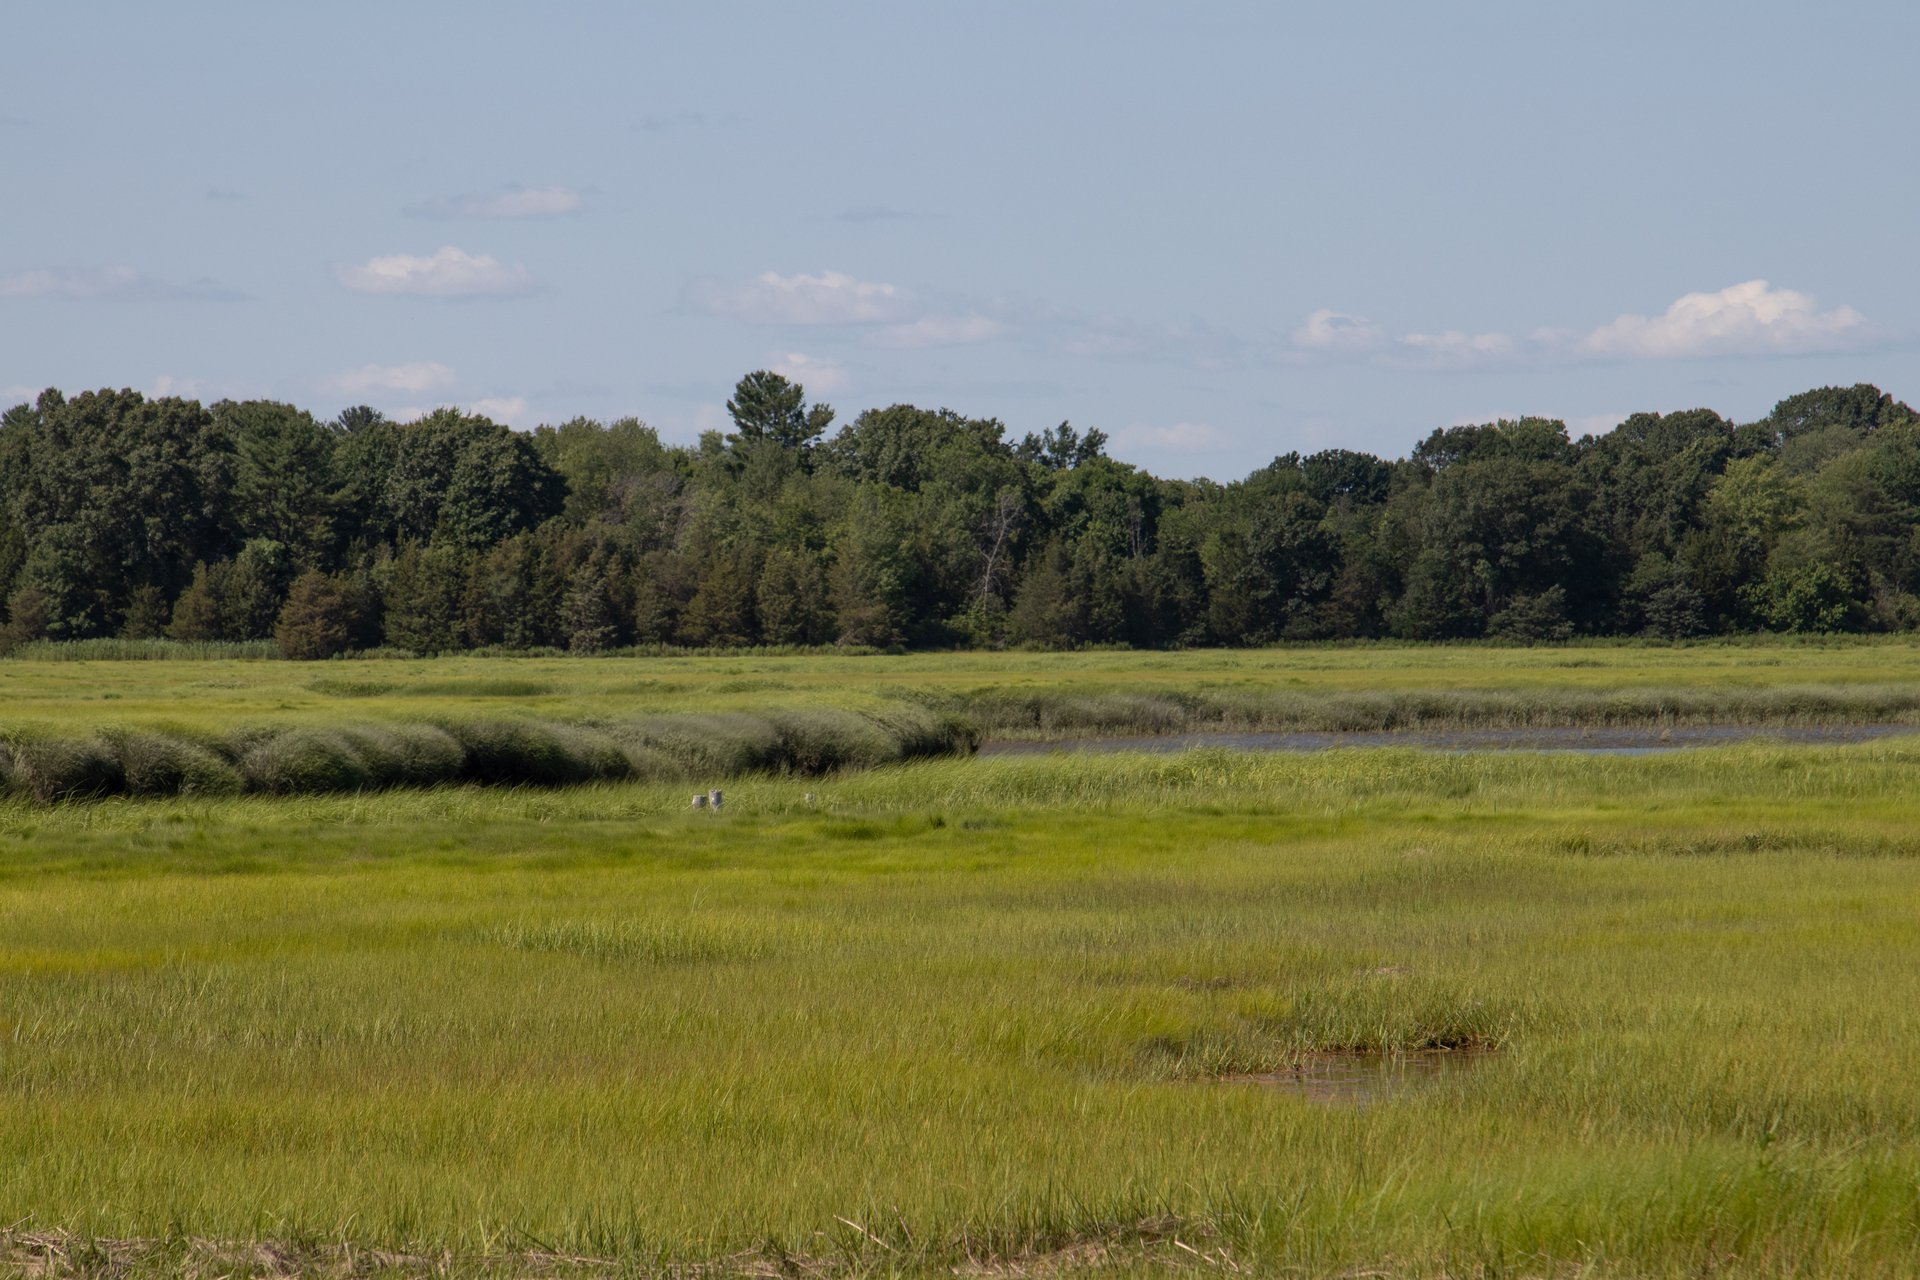 Green marshy wetlands with a river running through. On the far side of the marsh is a tall evergreen forest.